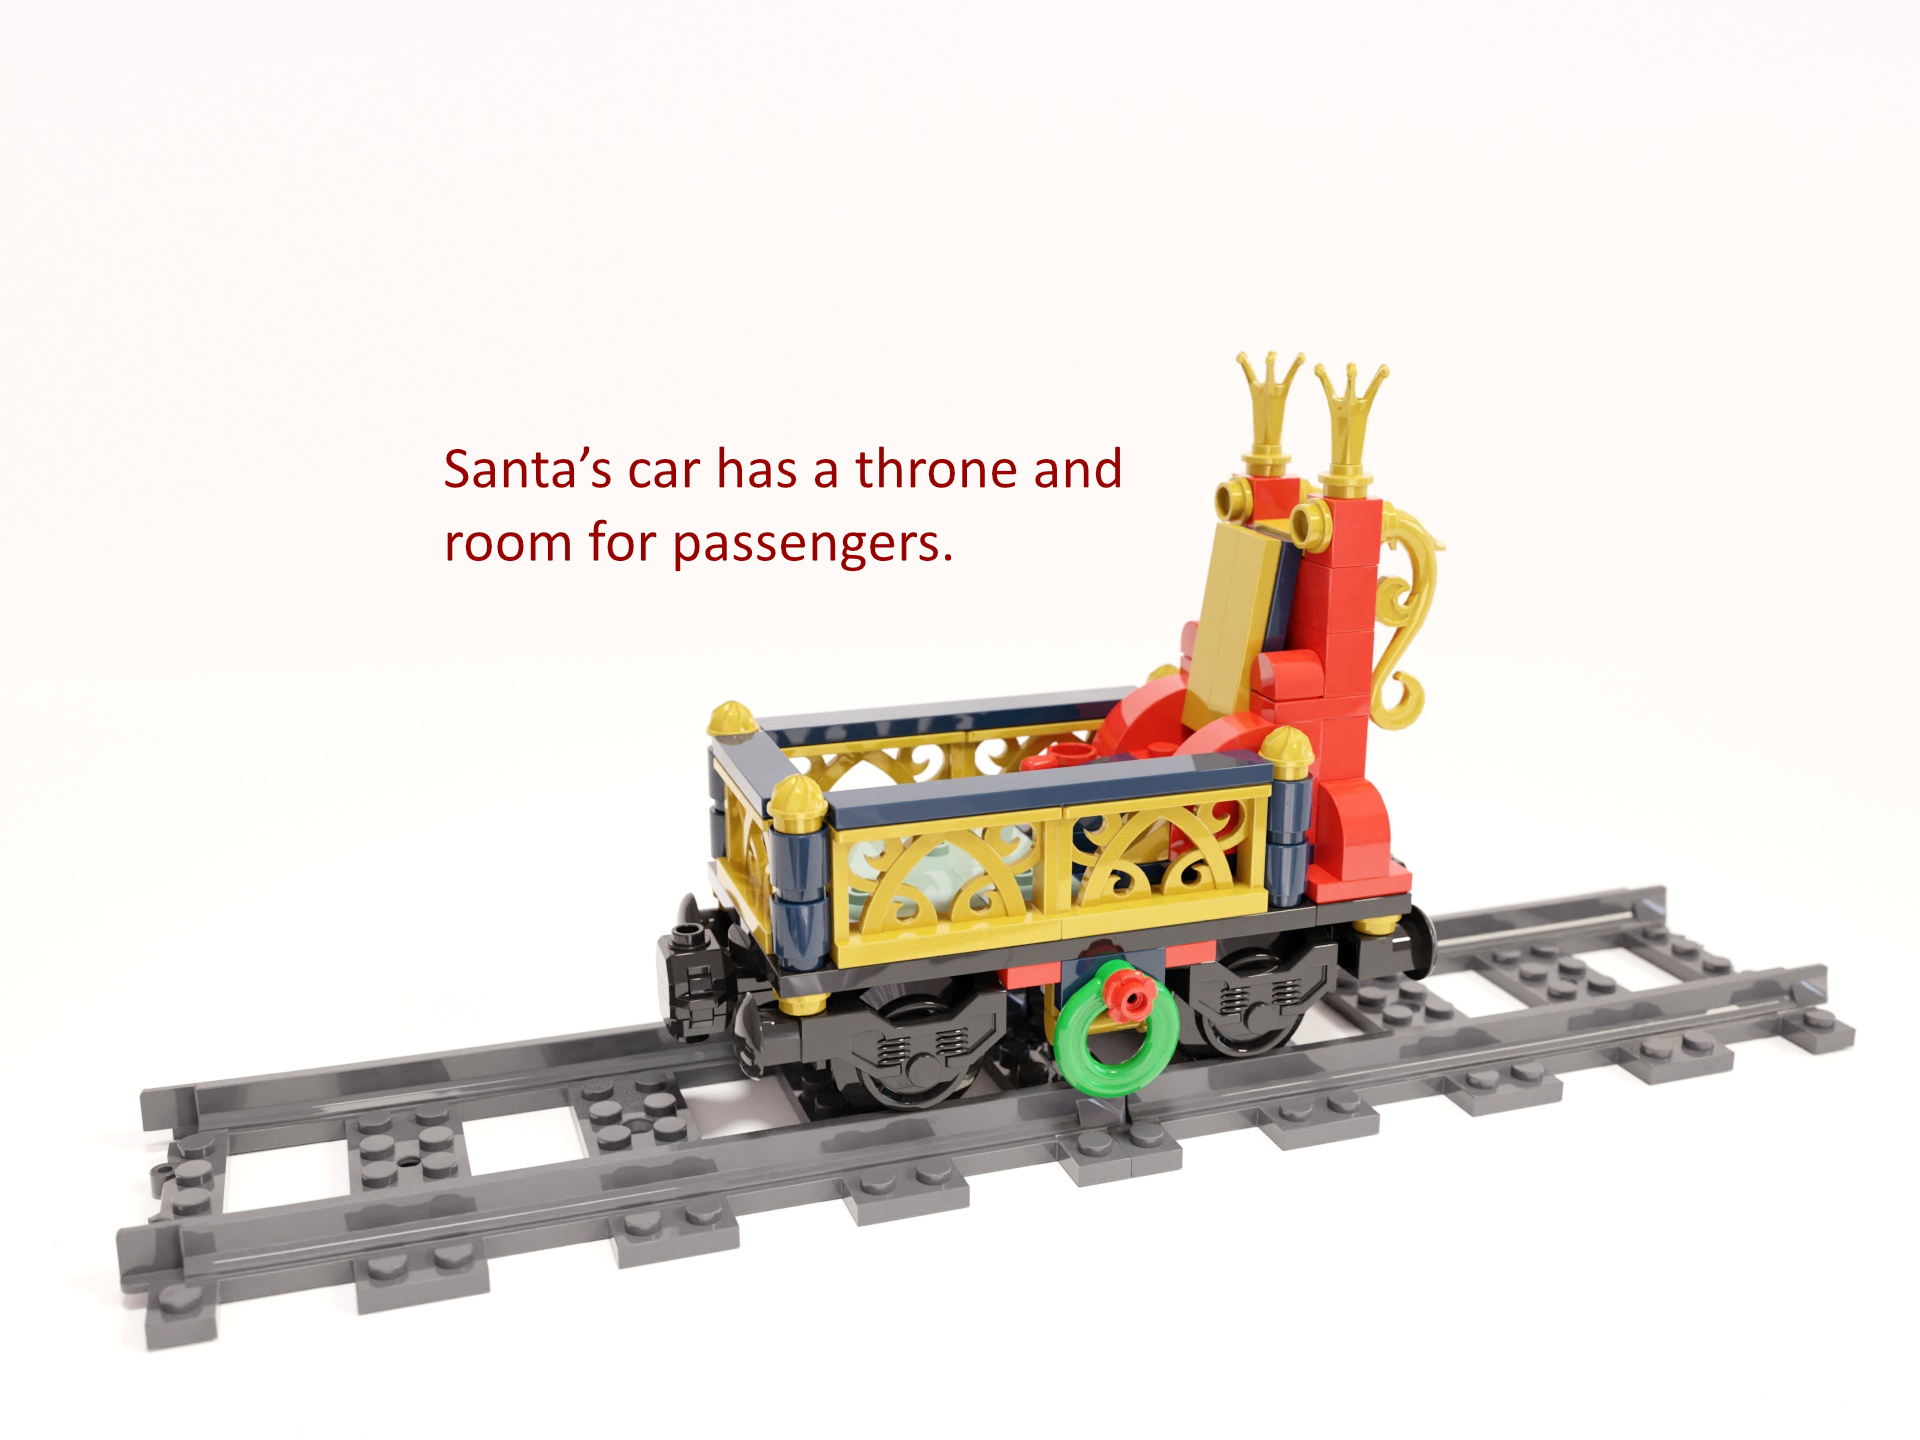 Picture 4: Santa's car has a throne and room for passengers.